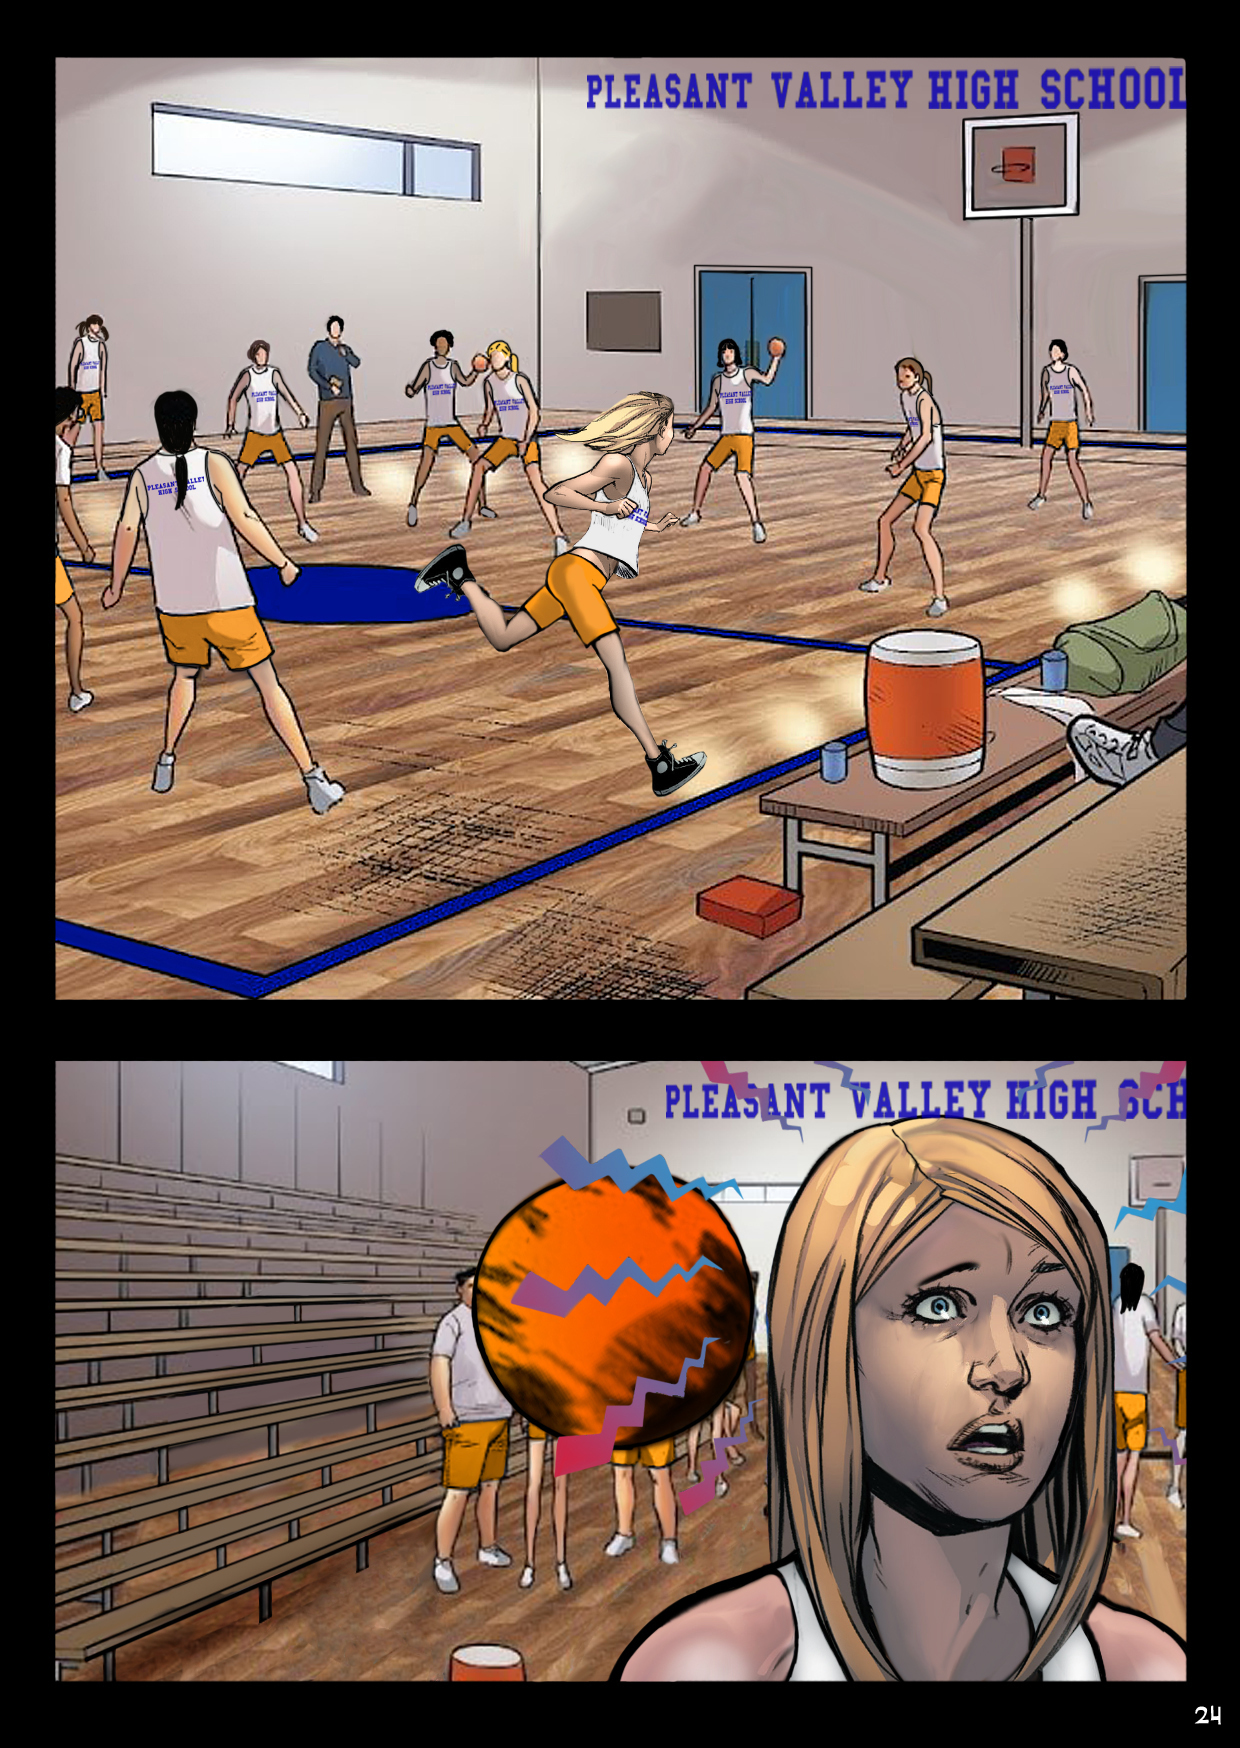 In physical education class, Nancy is suddently distracted by something. Watch out for that ball, Nancy!